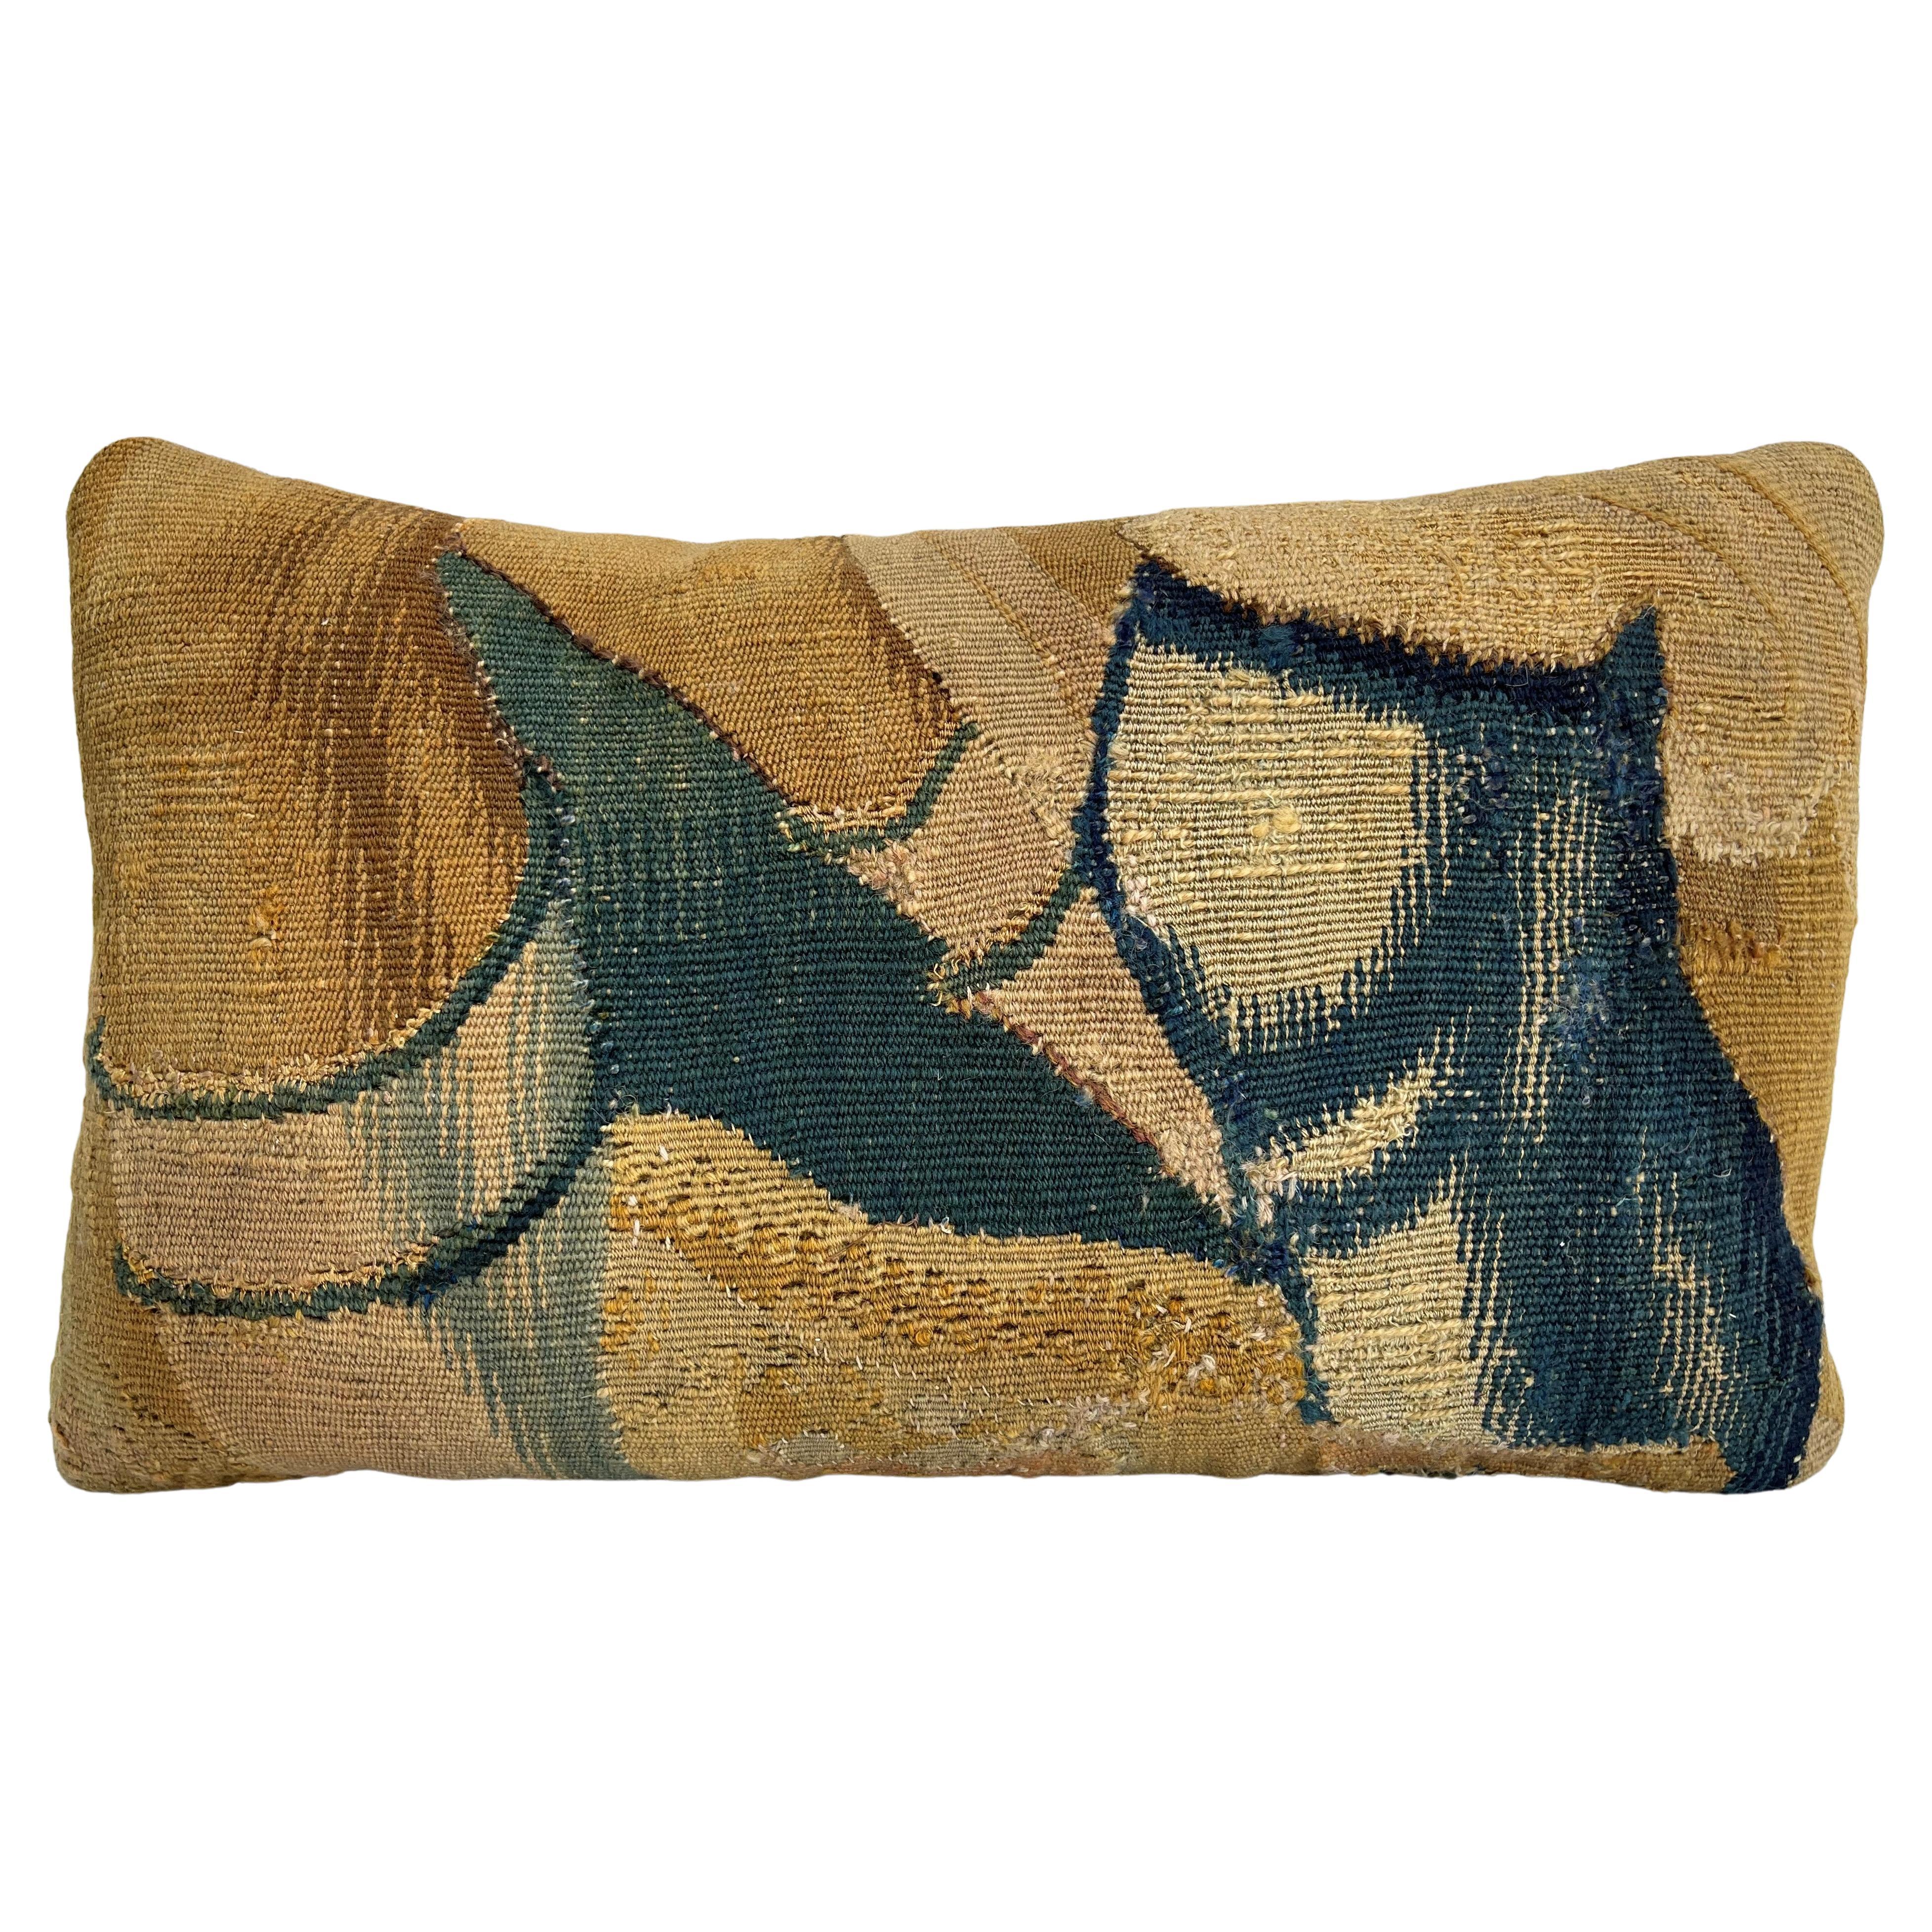 17th Century Flemish Tapestry Pillow - 19" X 11" For Sale